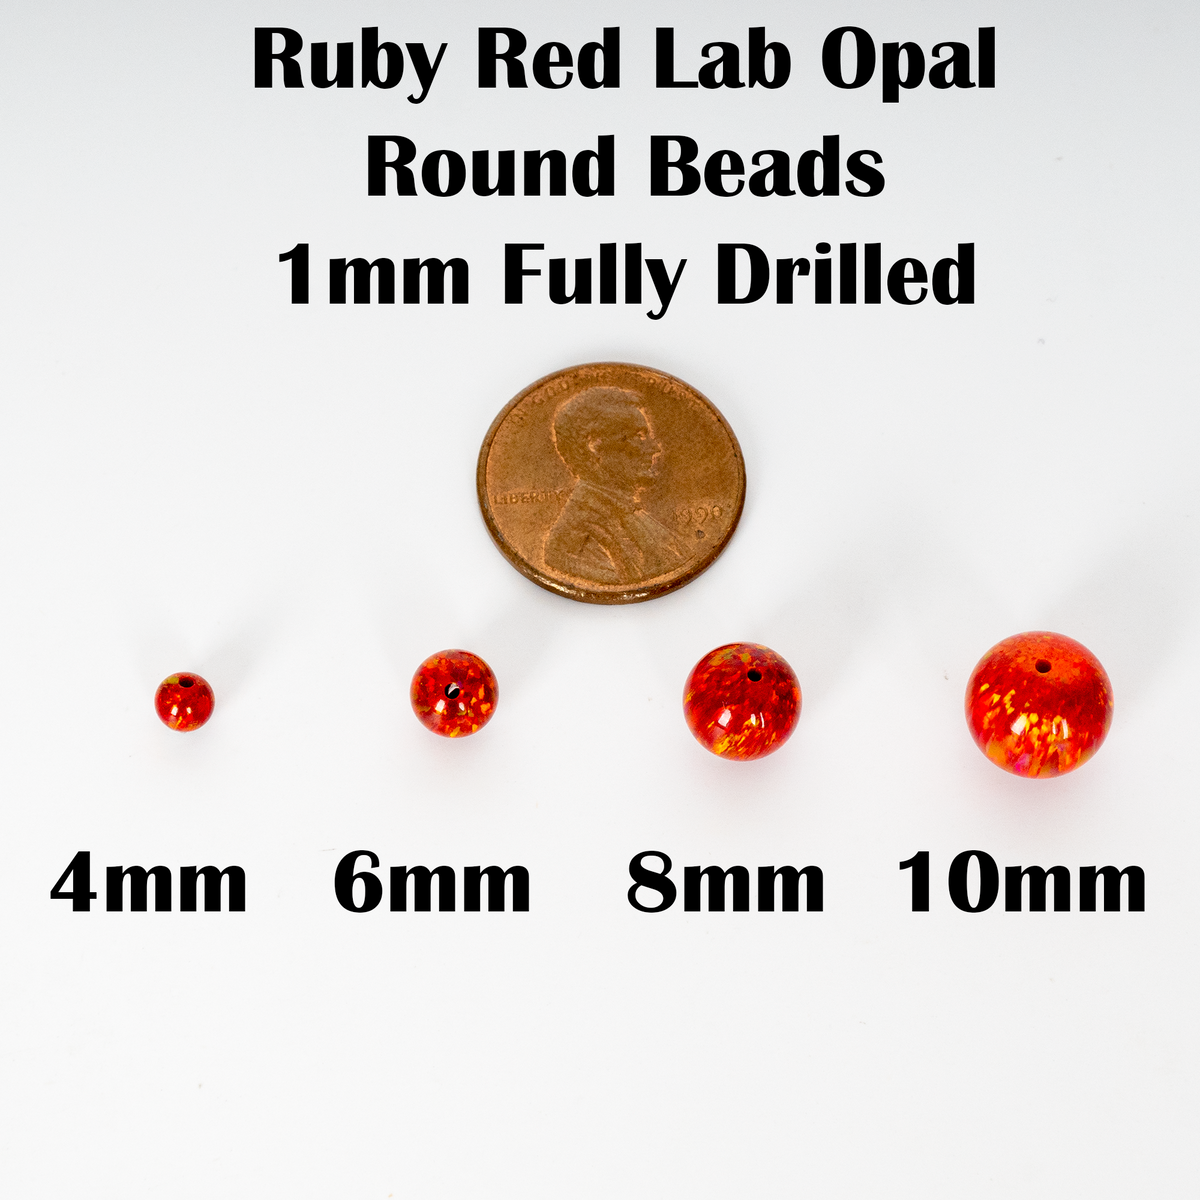 Opal Craft Beads - Ruby Red Opal Beads - Jewelry Making & Crafts